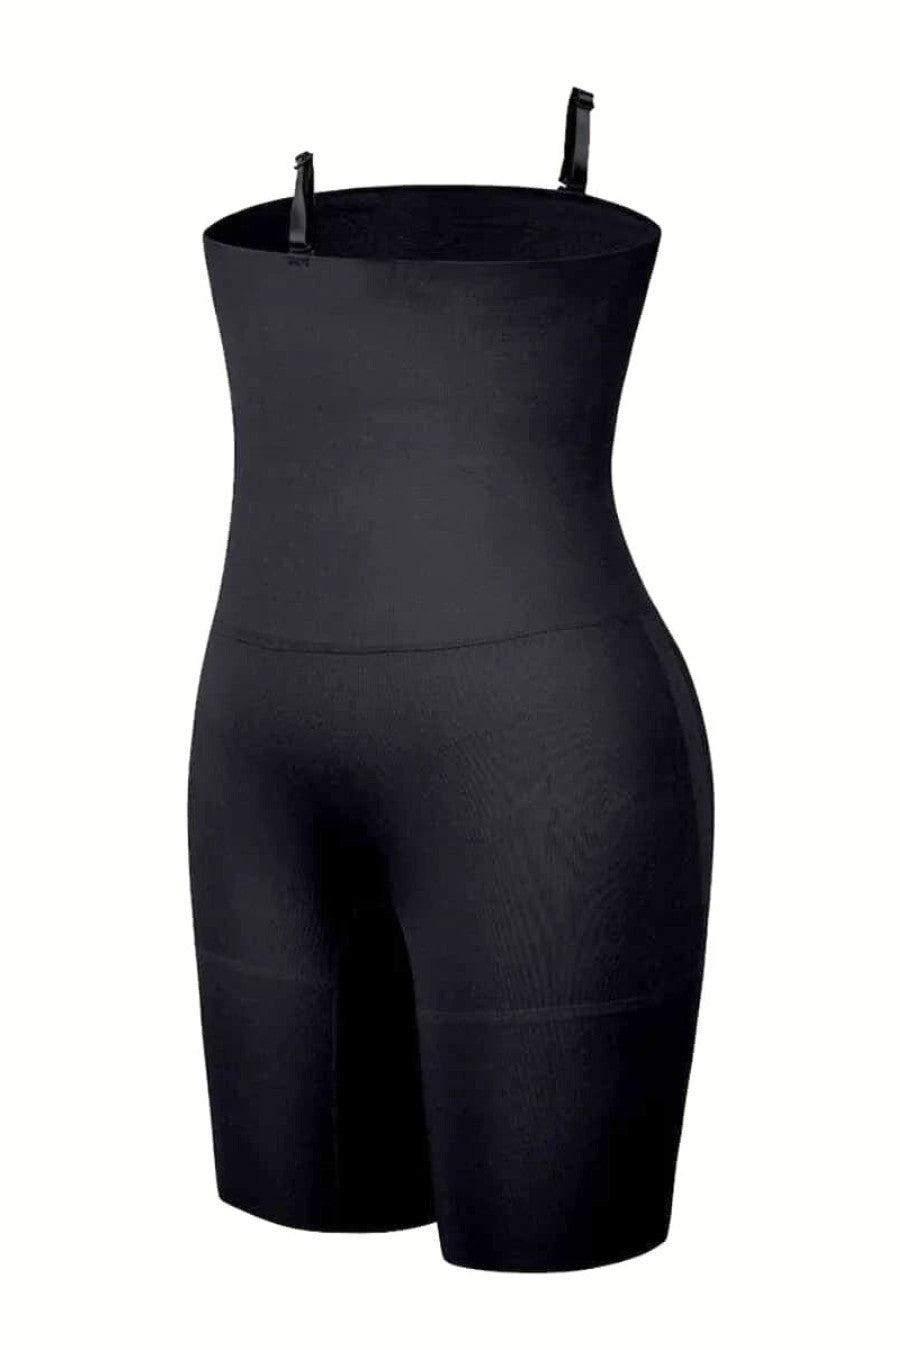 SAMPLE - Stomach & Thigh Shapers - XS/S Contour Clothing